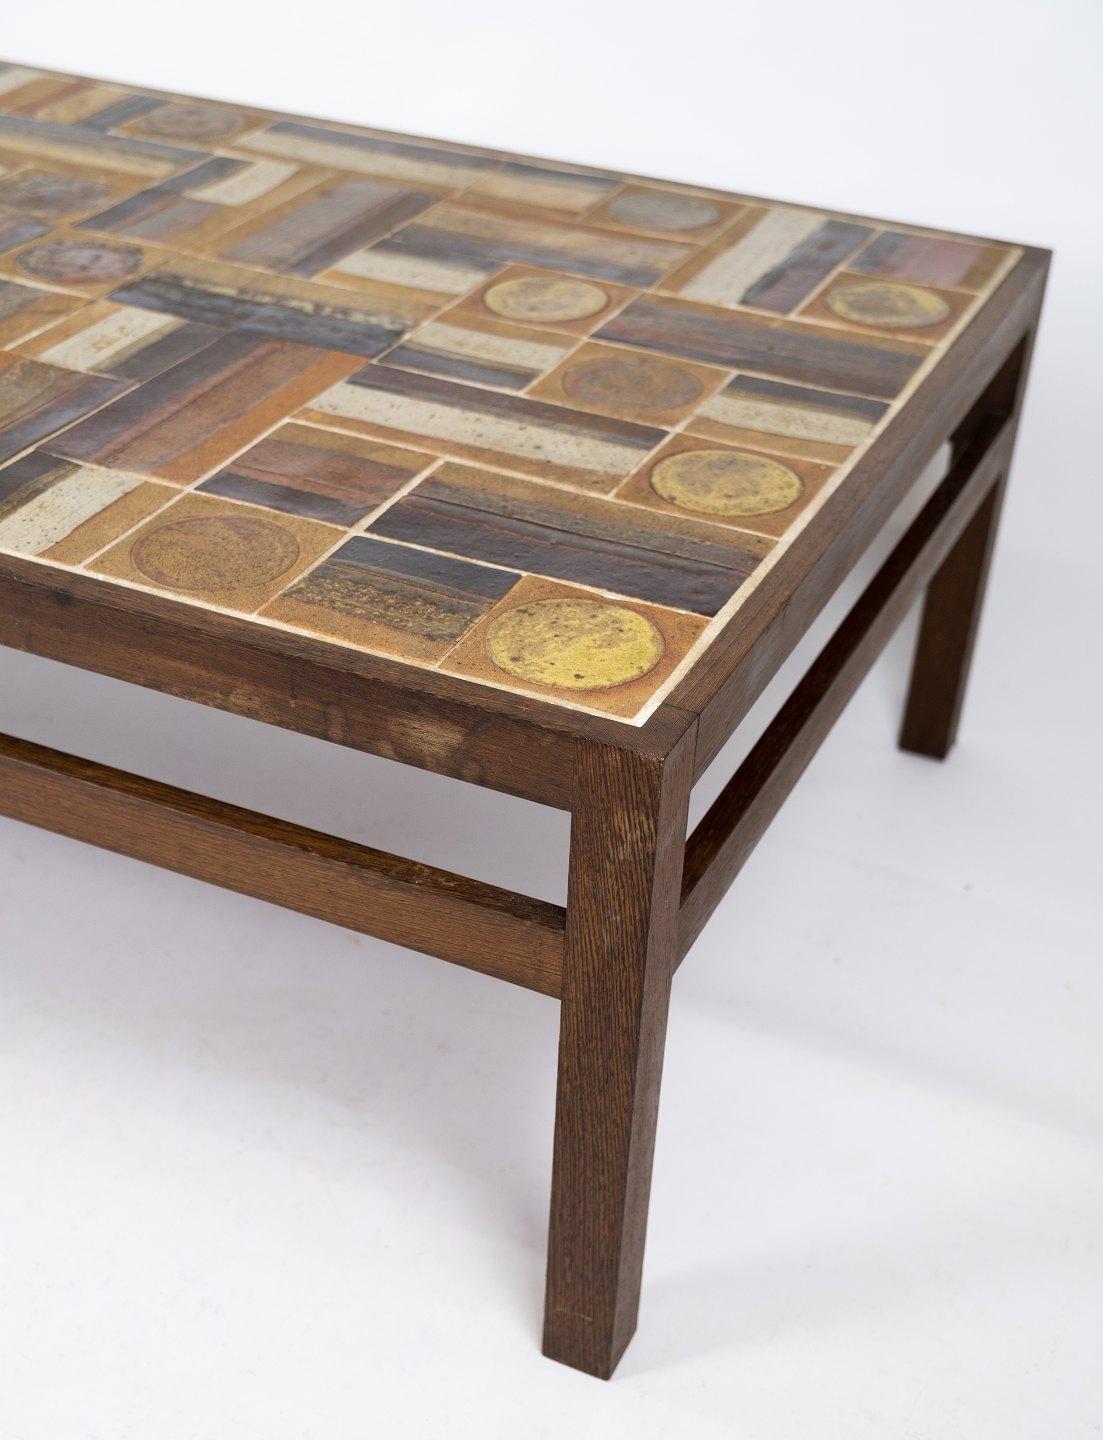 Danish Coffee Table in Rosewood and Dark Tiles, Designed by Tue Poulsen from the 1970s